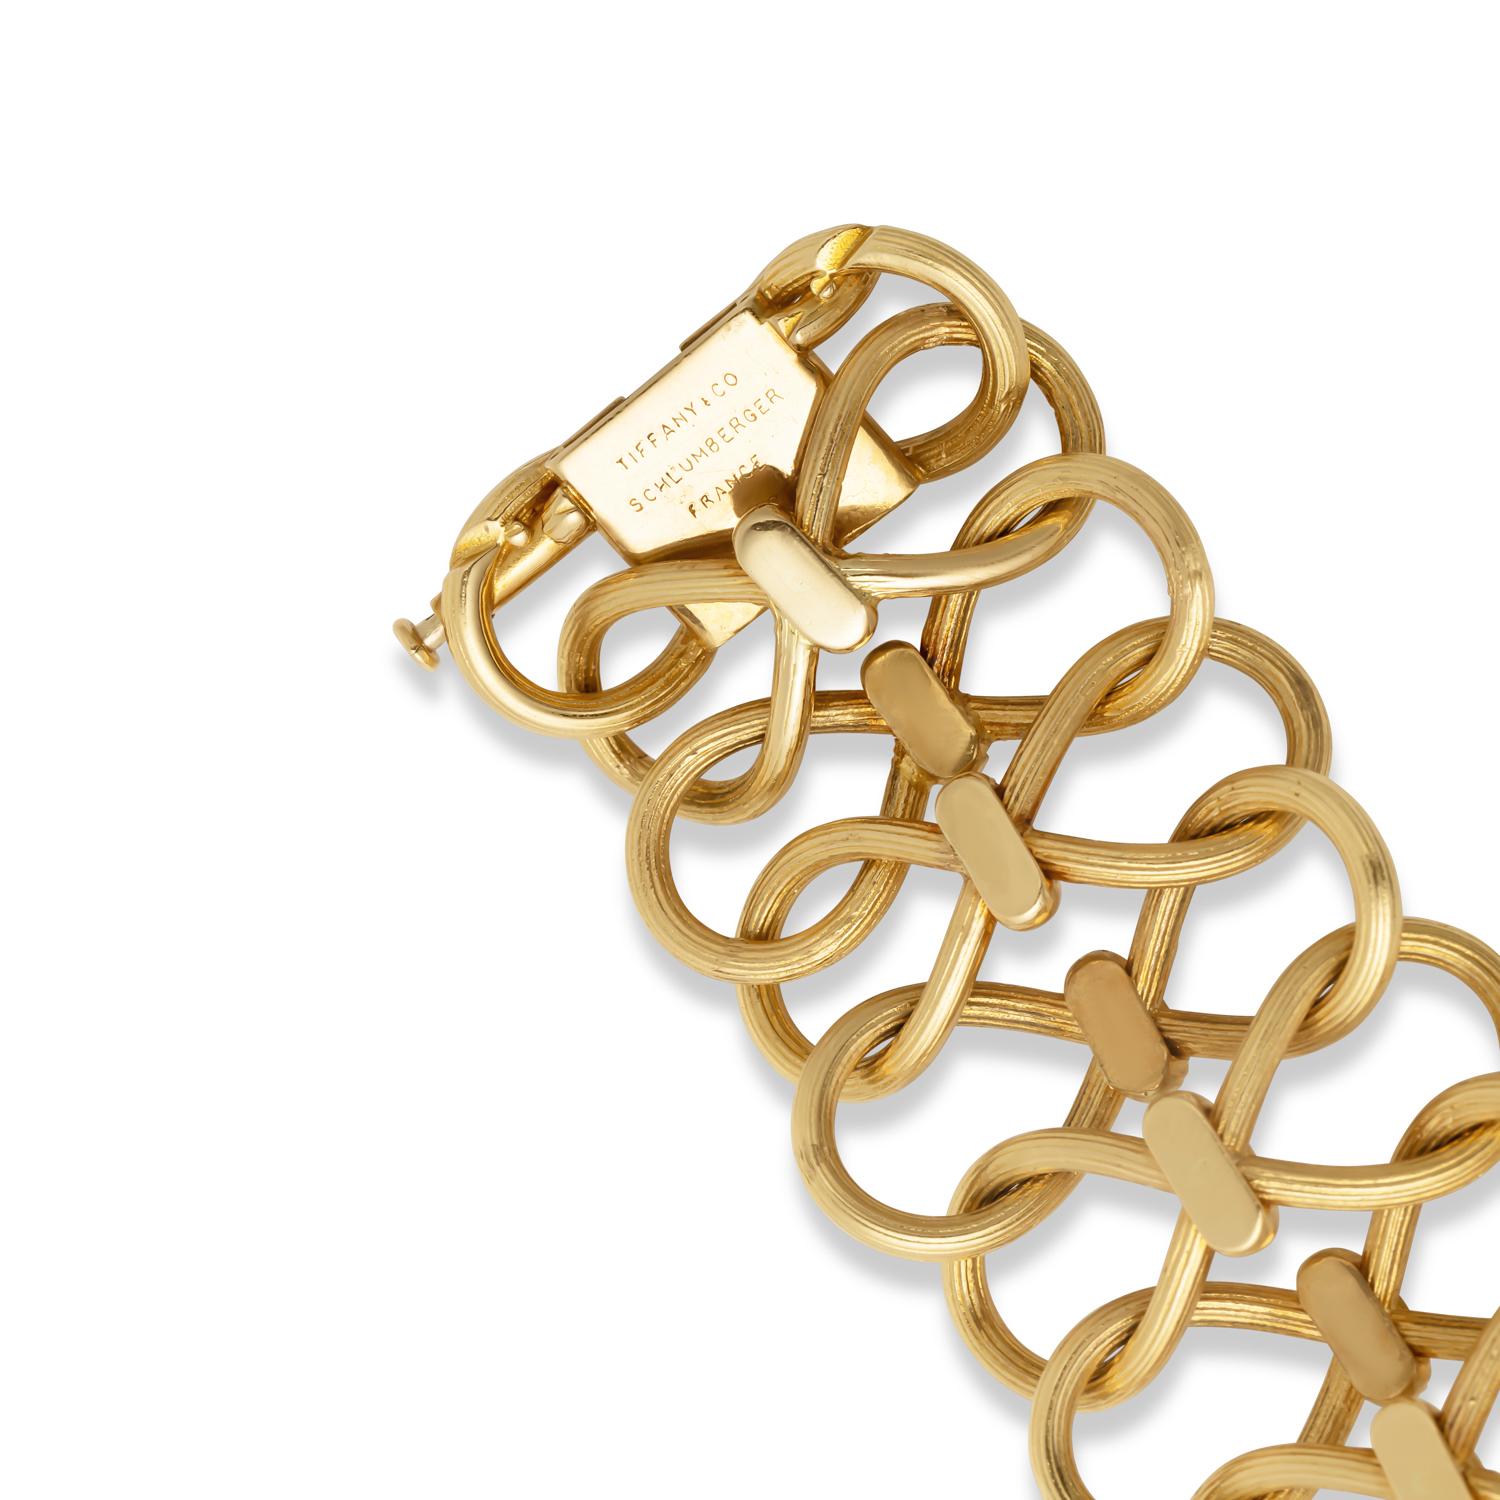 Elevate your wristwear with the timeless elegance of the Tiffany & Co. 18K Yellow Gold Schlumberger Bracelet. Crafted with impeccable artistry, this bracelet features a captivating braided link style that exudes sophistication and charm.

Each link